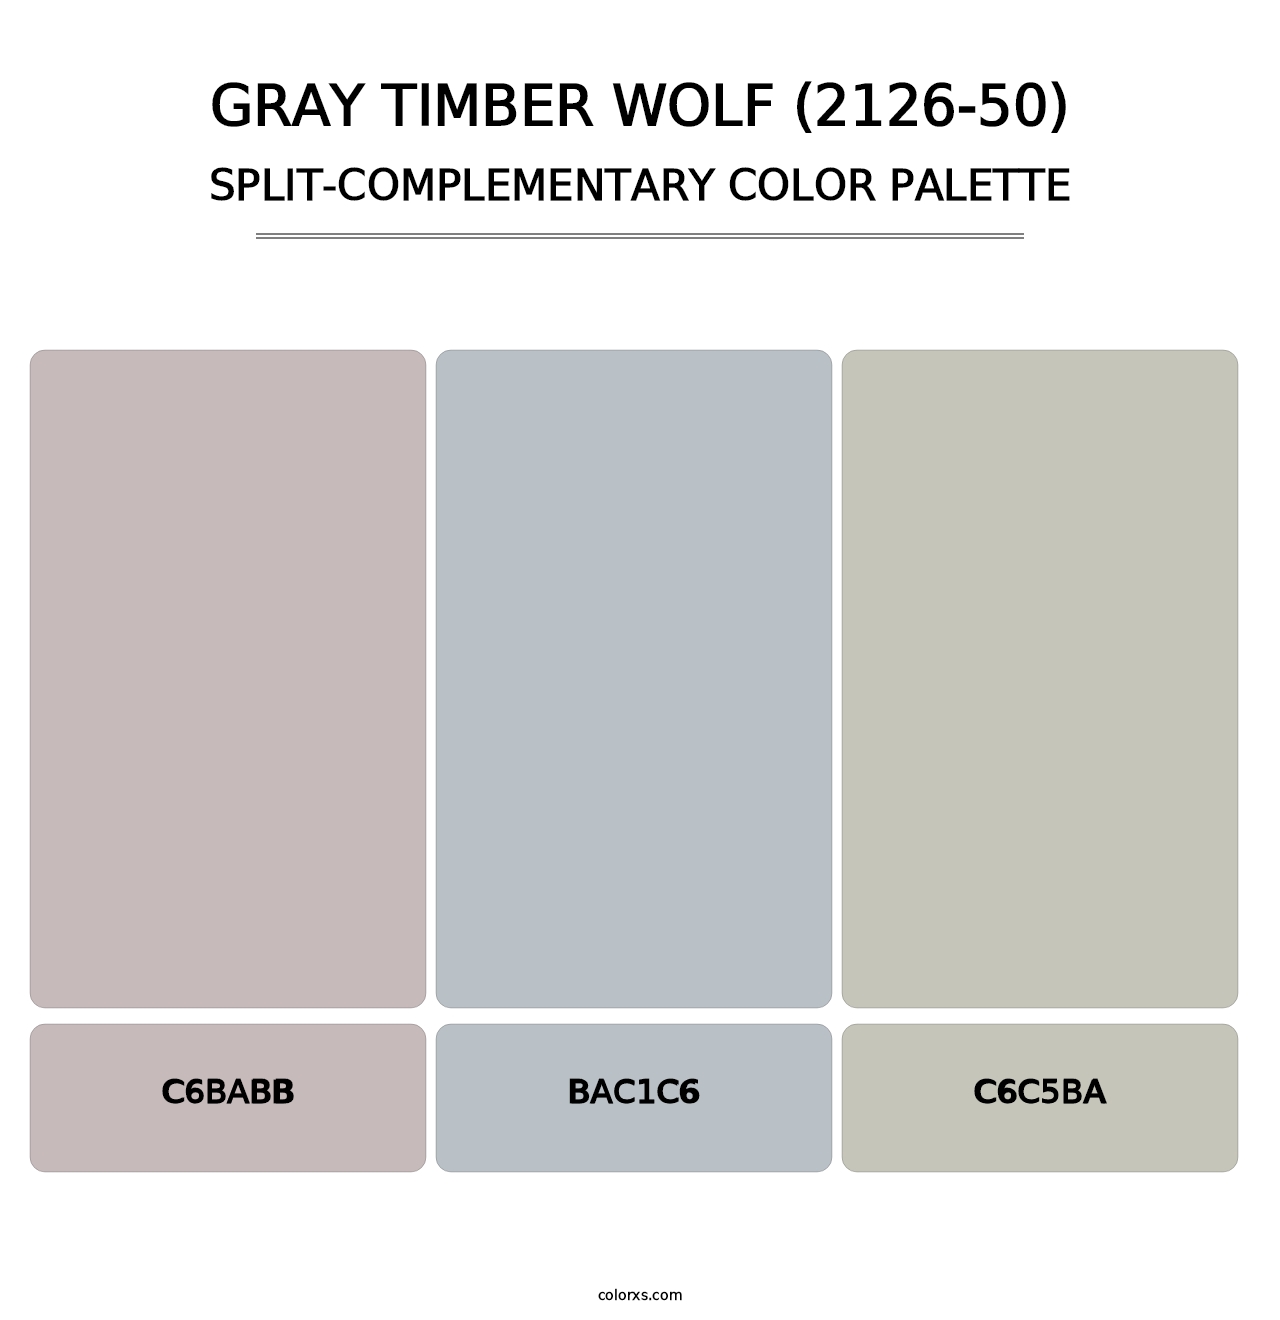 Gray Timber Wolf (2126-50) - Split-Complementary Color Palette